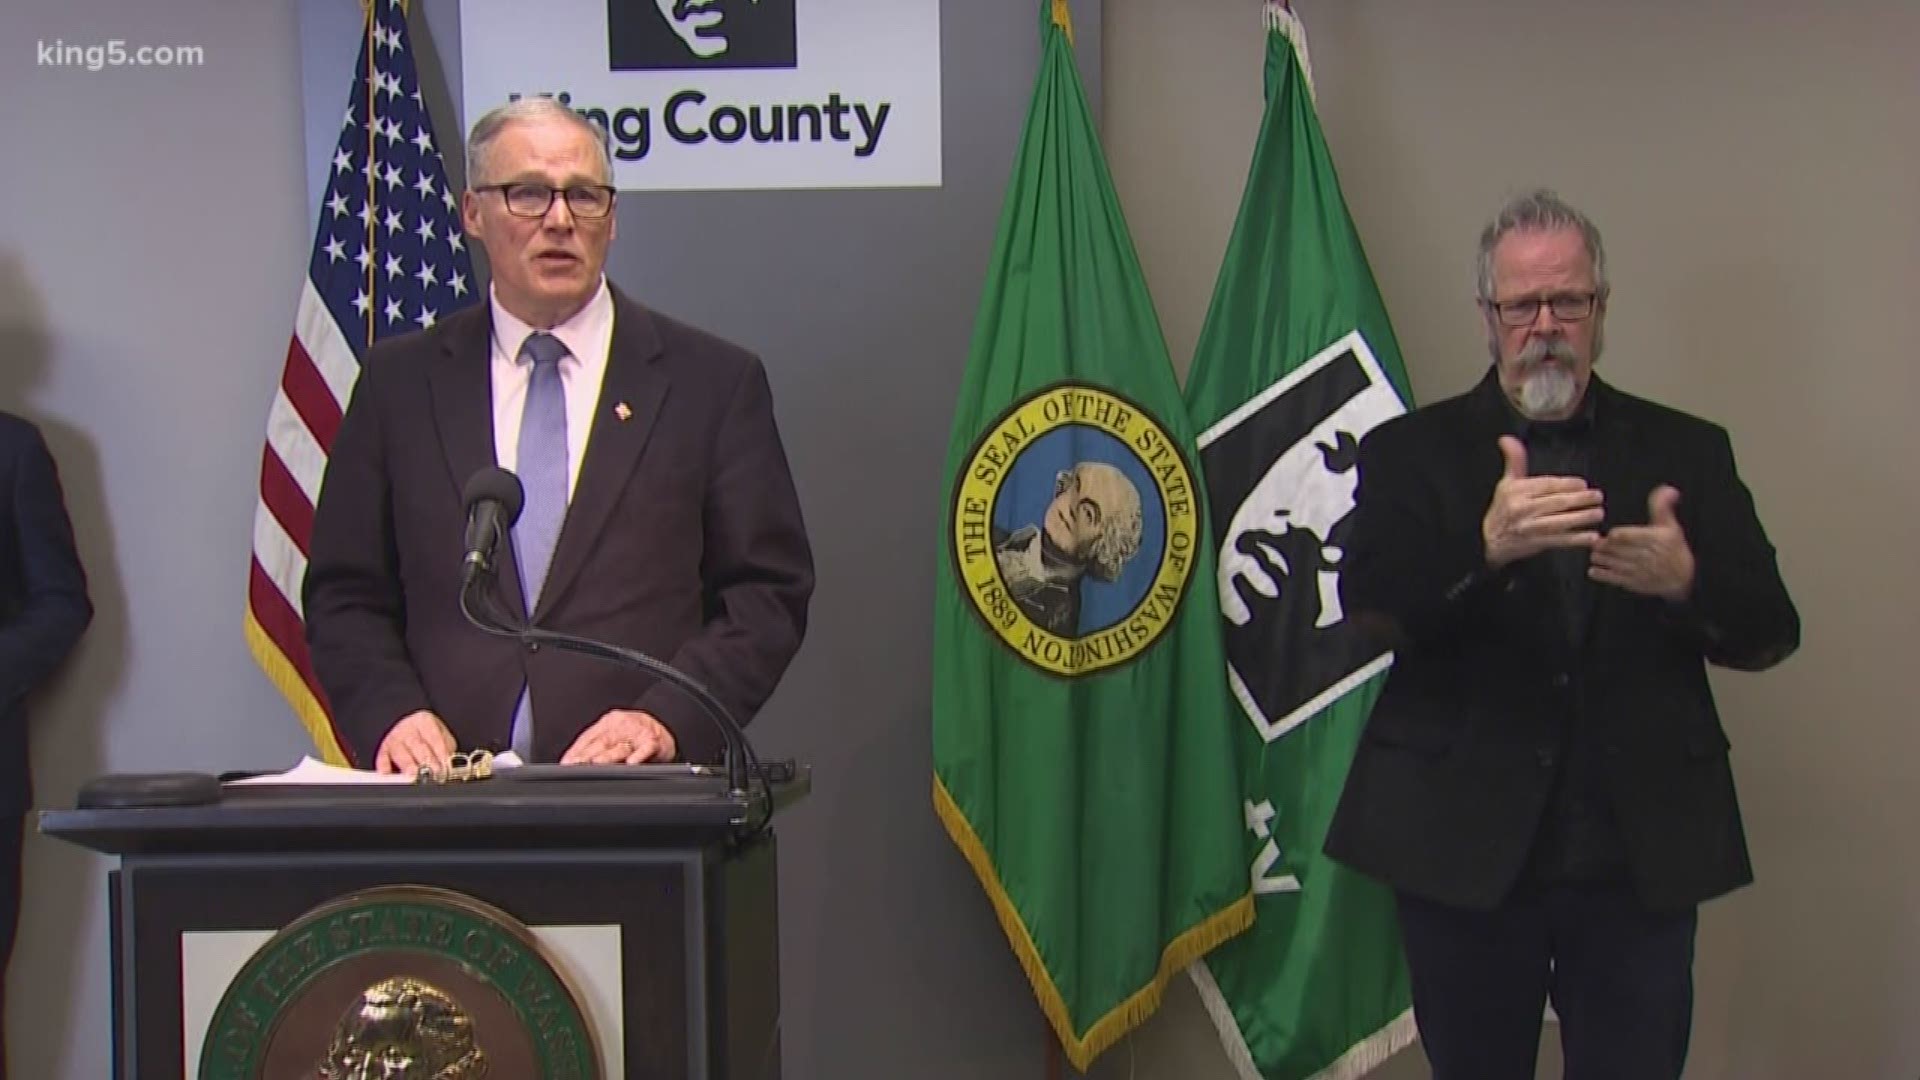 Washington Gov. Jay Inslee announced that he will be signing an emergency proclamation to temporarily shut down bars and restaurants.